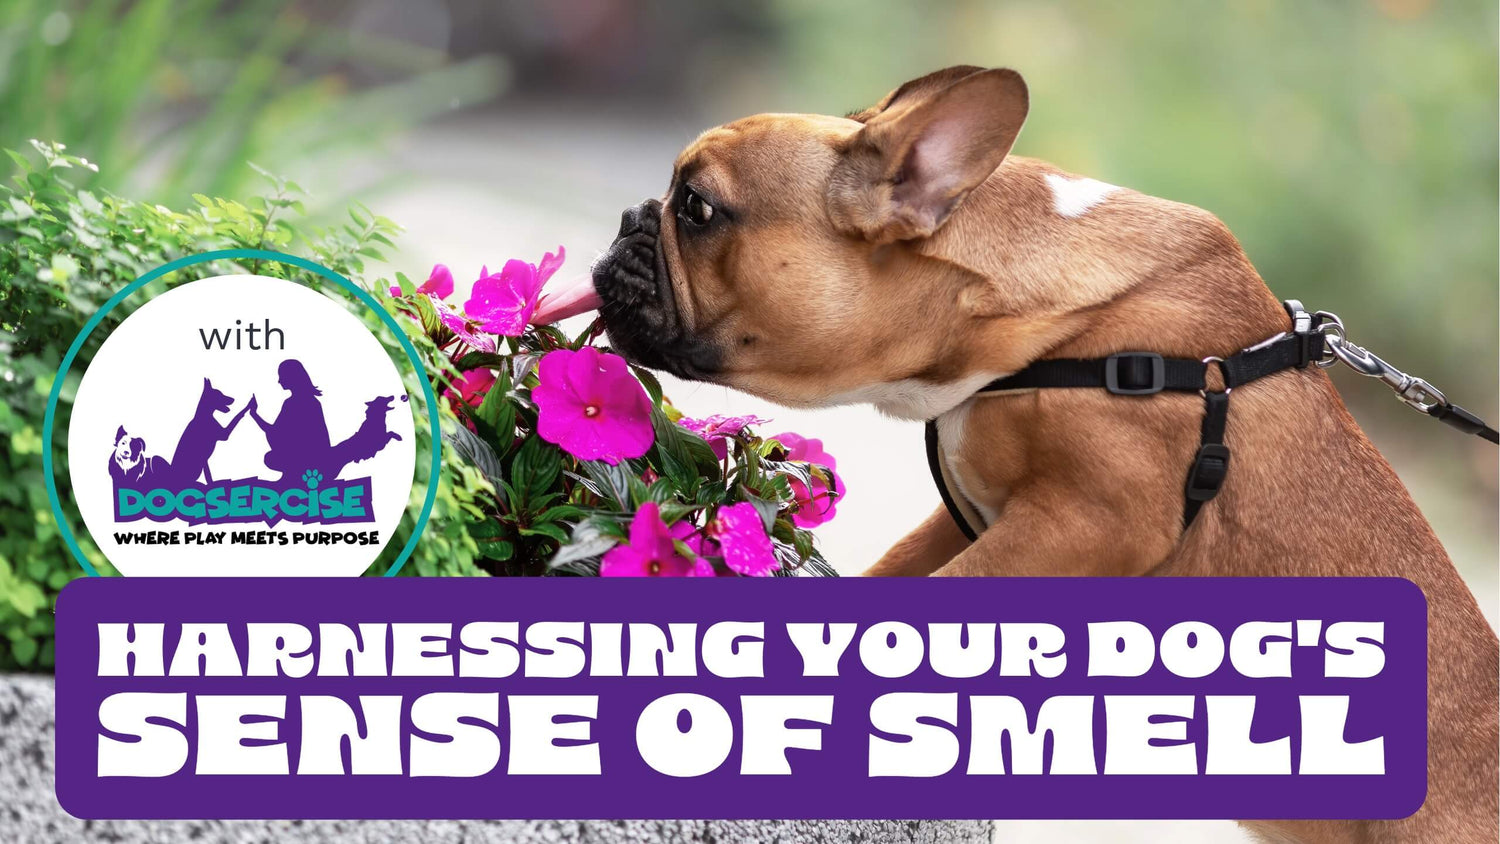 A French Bulldog stretching to smell a flower and a box with text “Harnessing your Dog's Sense of Smell”